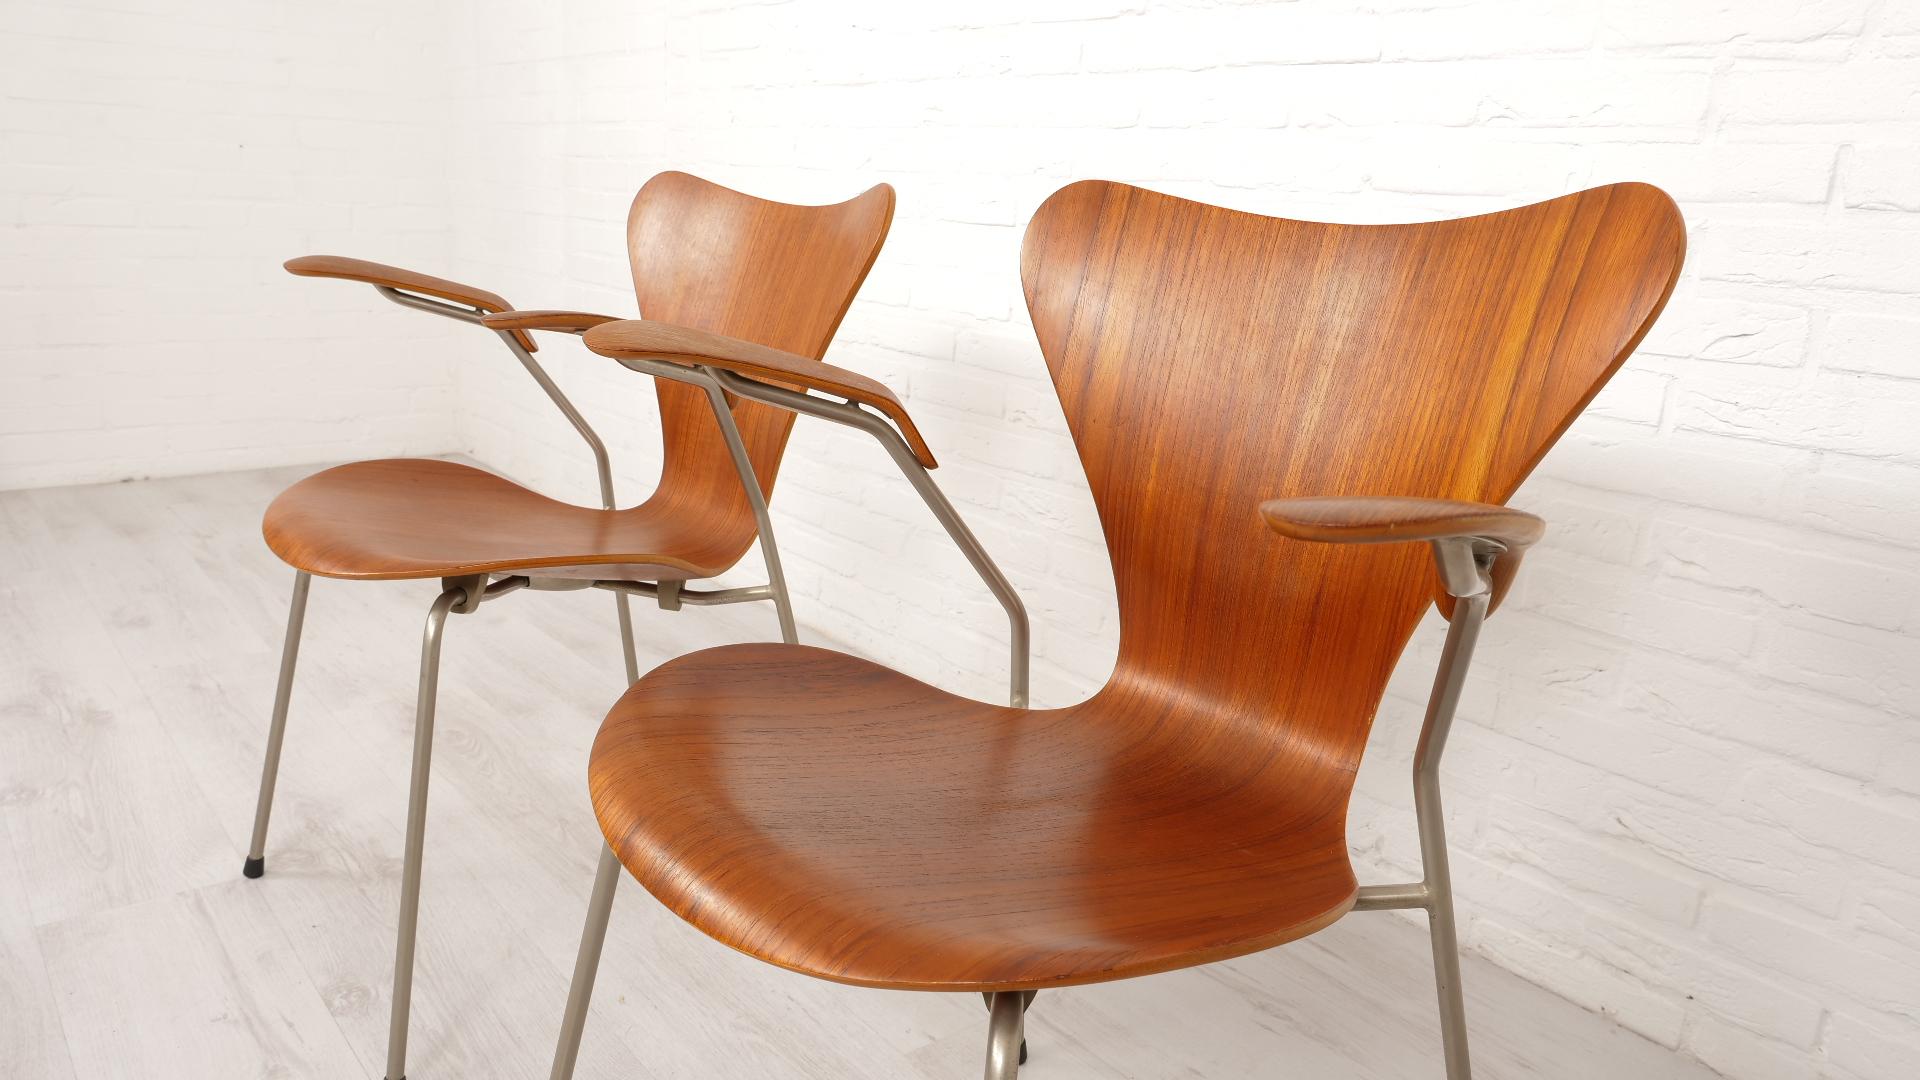 2 Vintage butterfly chairs with armrests by Arne Jacobsen model 3207 Teak 1